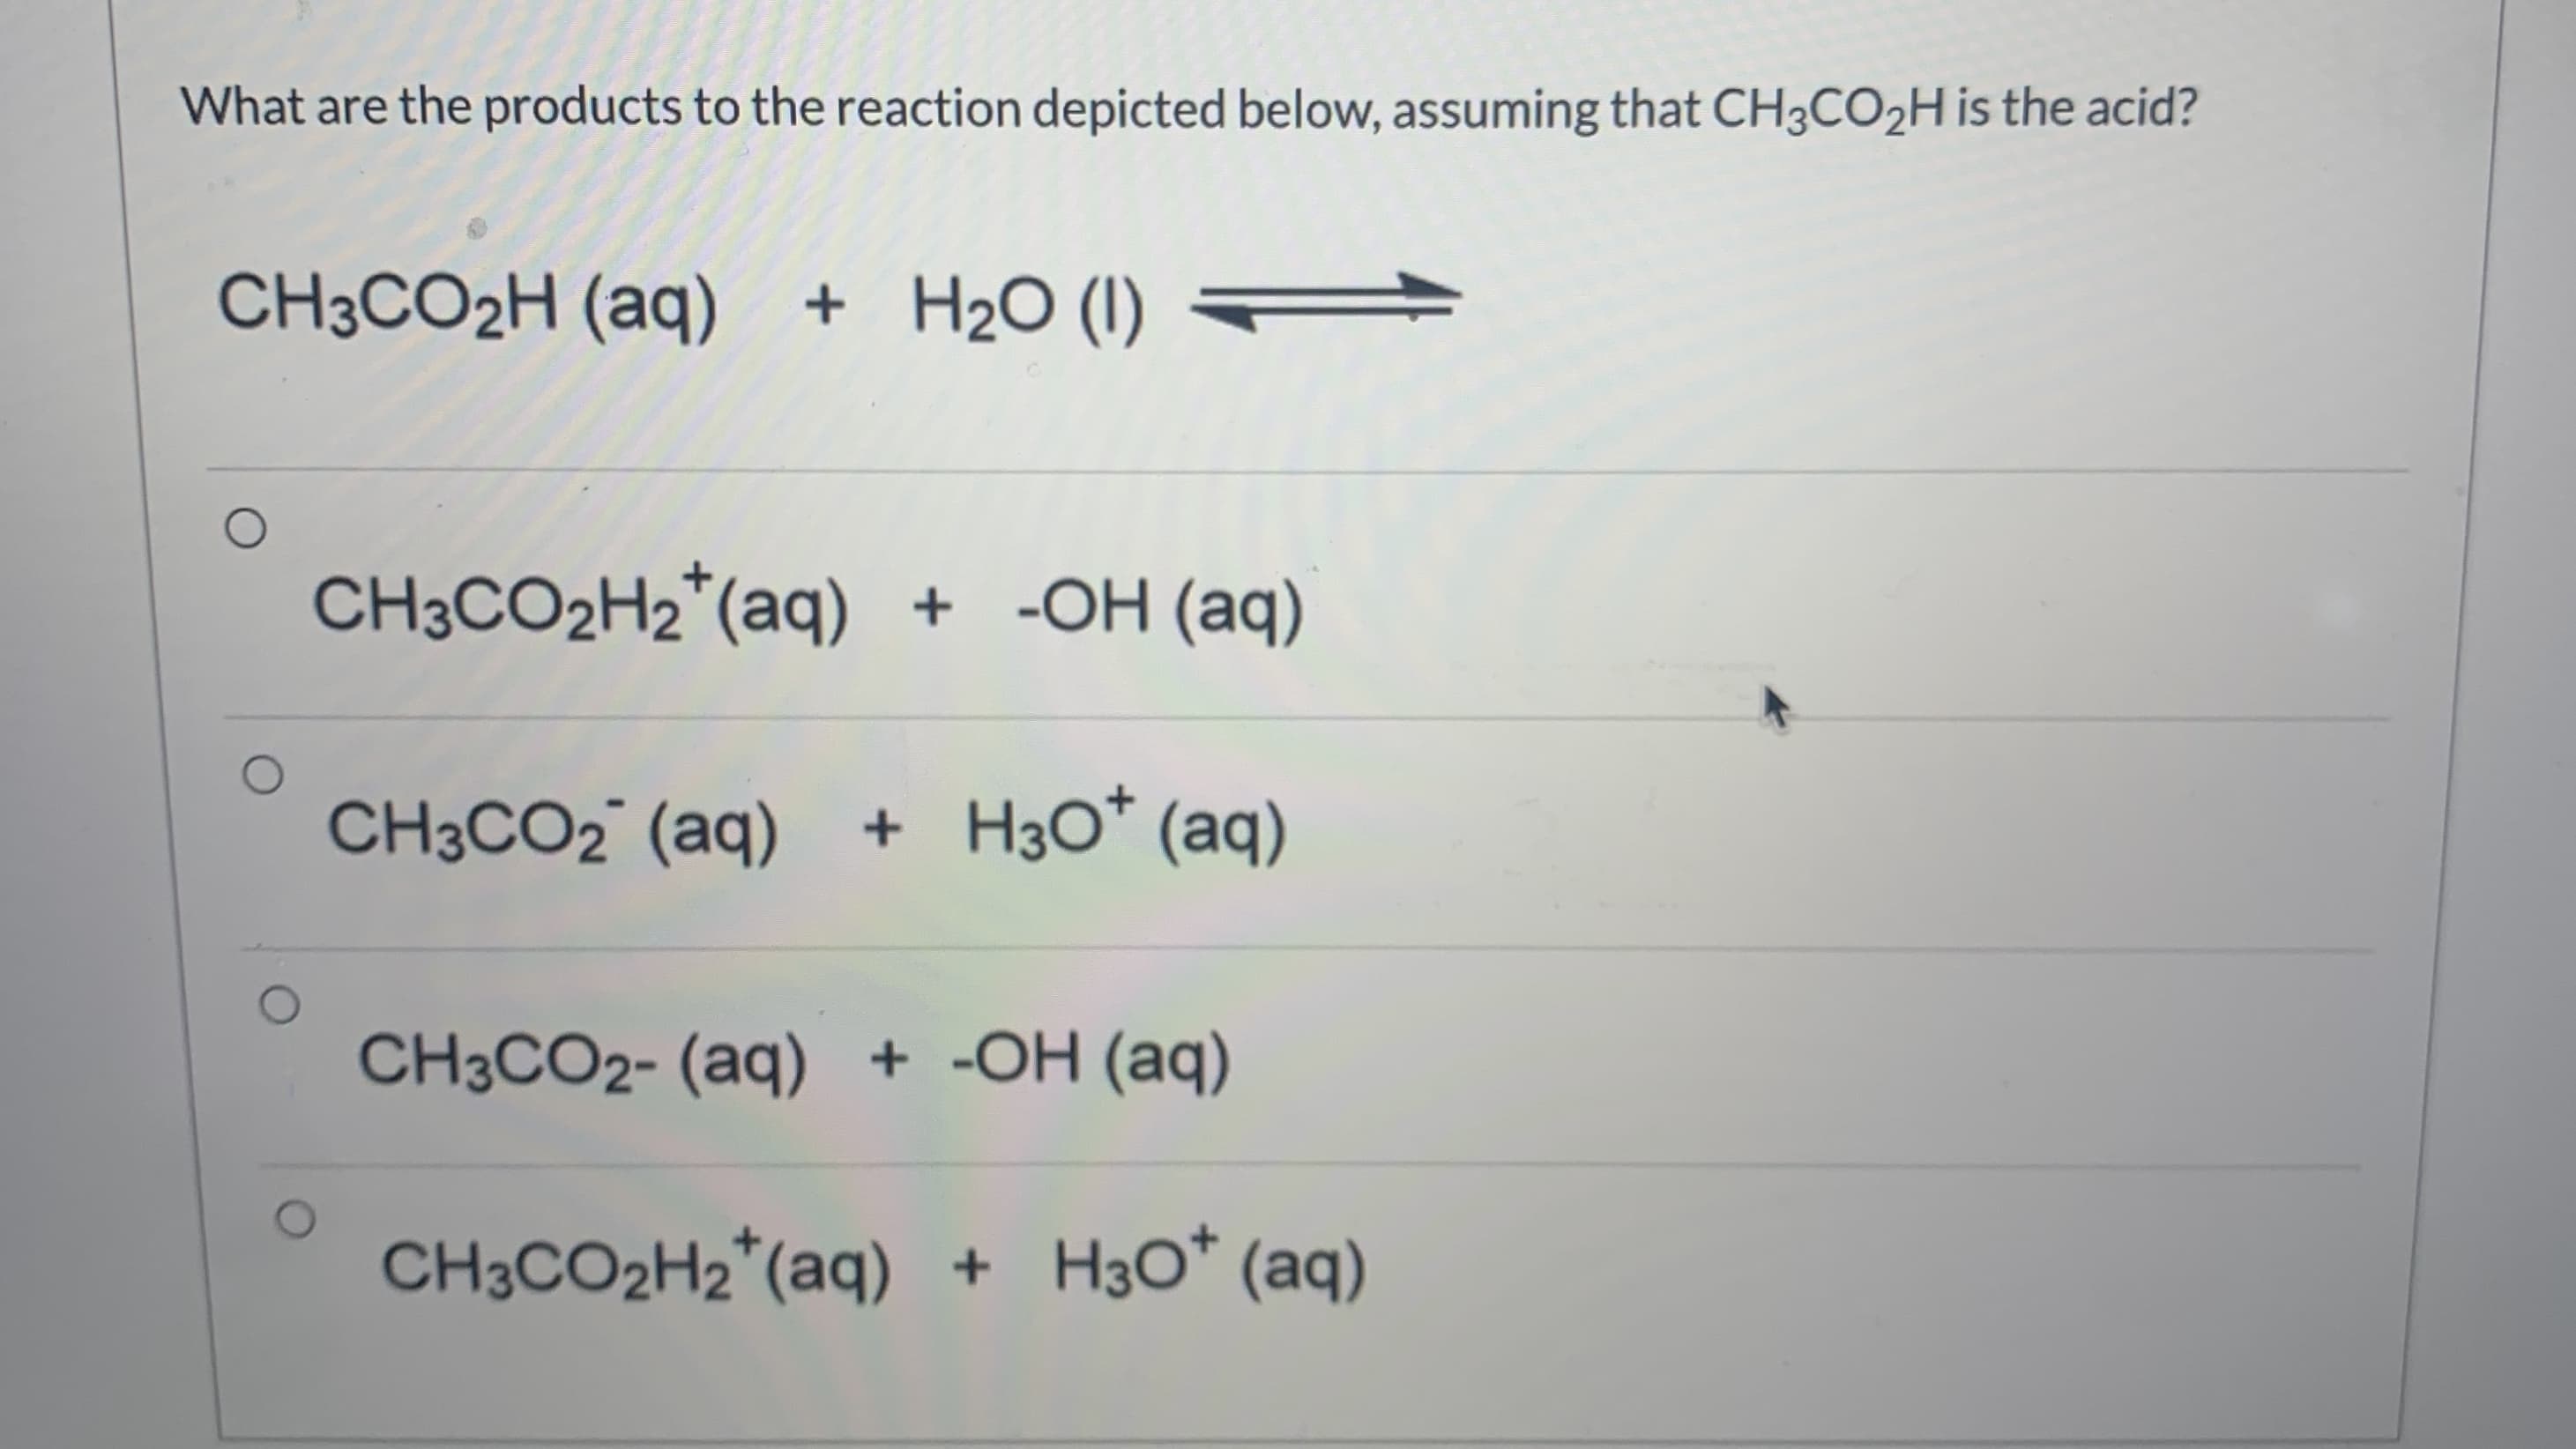 What are the products to the reaction depicted below, assuming that CH3CO2H is the acid?
CH3CO2H (aq) + H2O (1) =
CH3CO2H2*(aq) + -OH (aq)
